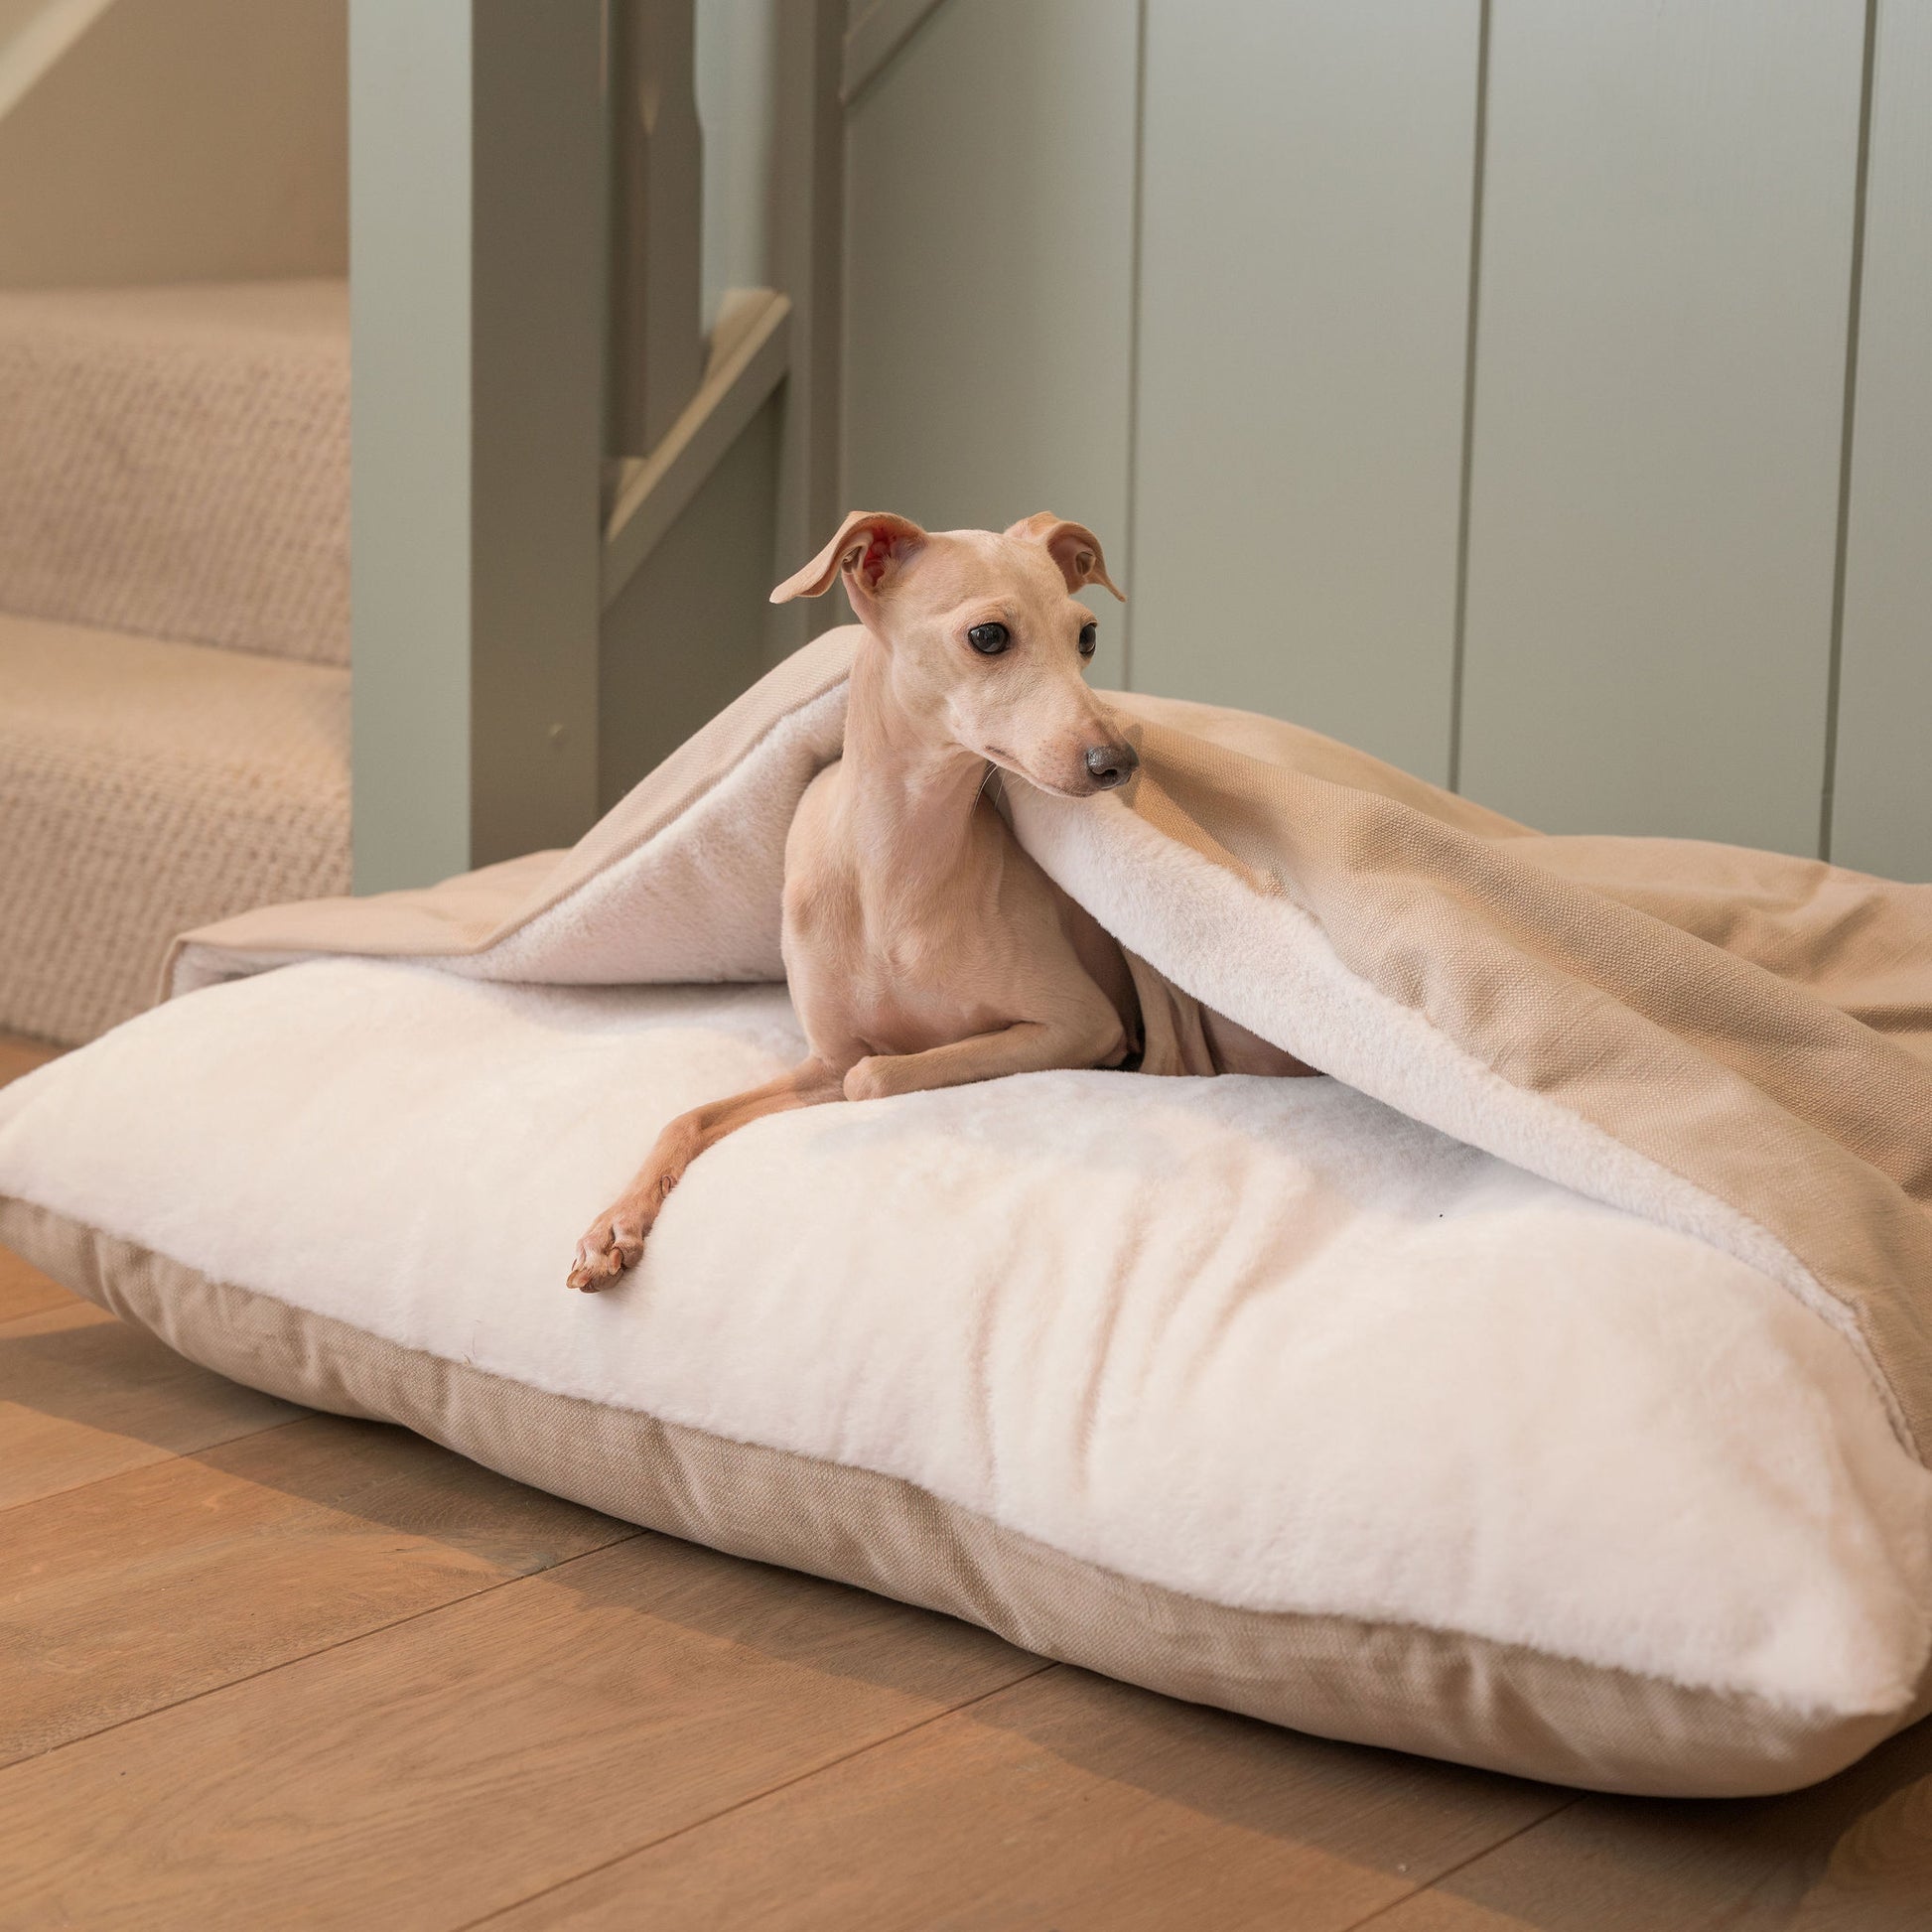 Luxury Savanna Sleepy Burrow, The Perfect bed For a Pet to Burrow. Available To Personalize In Stunning Savanna Oatmeal, Here at Lords & Labradors US